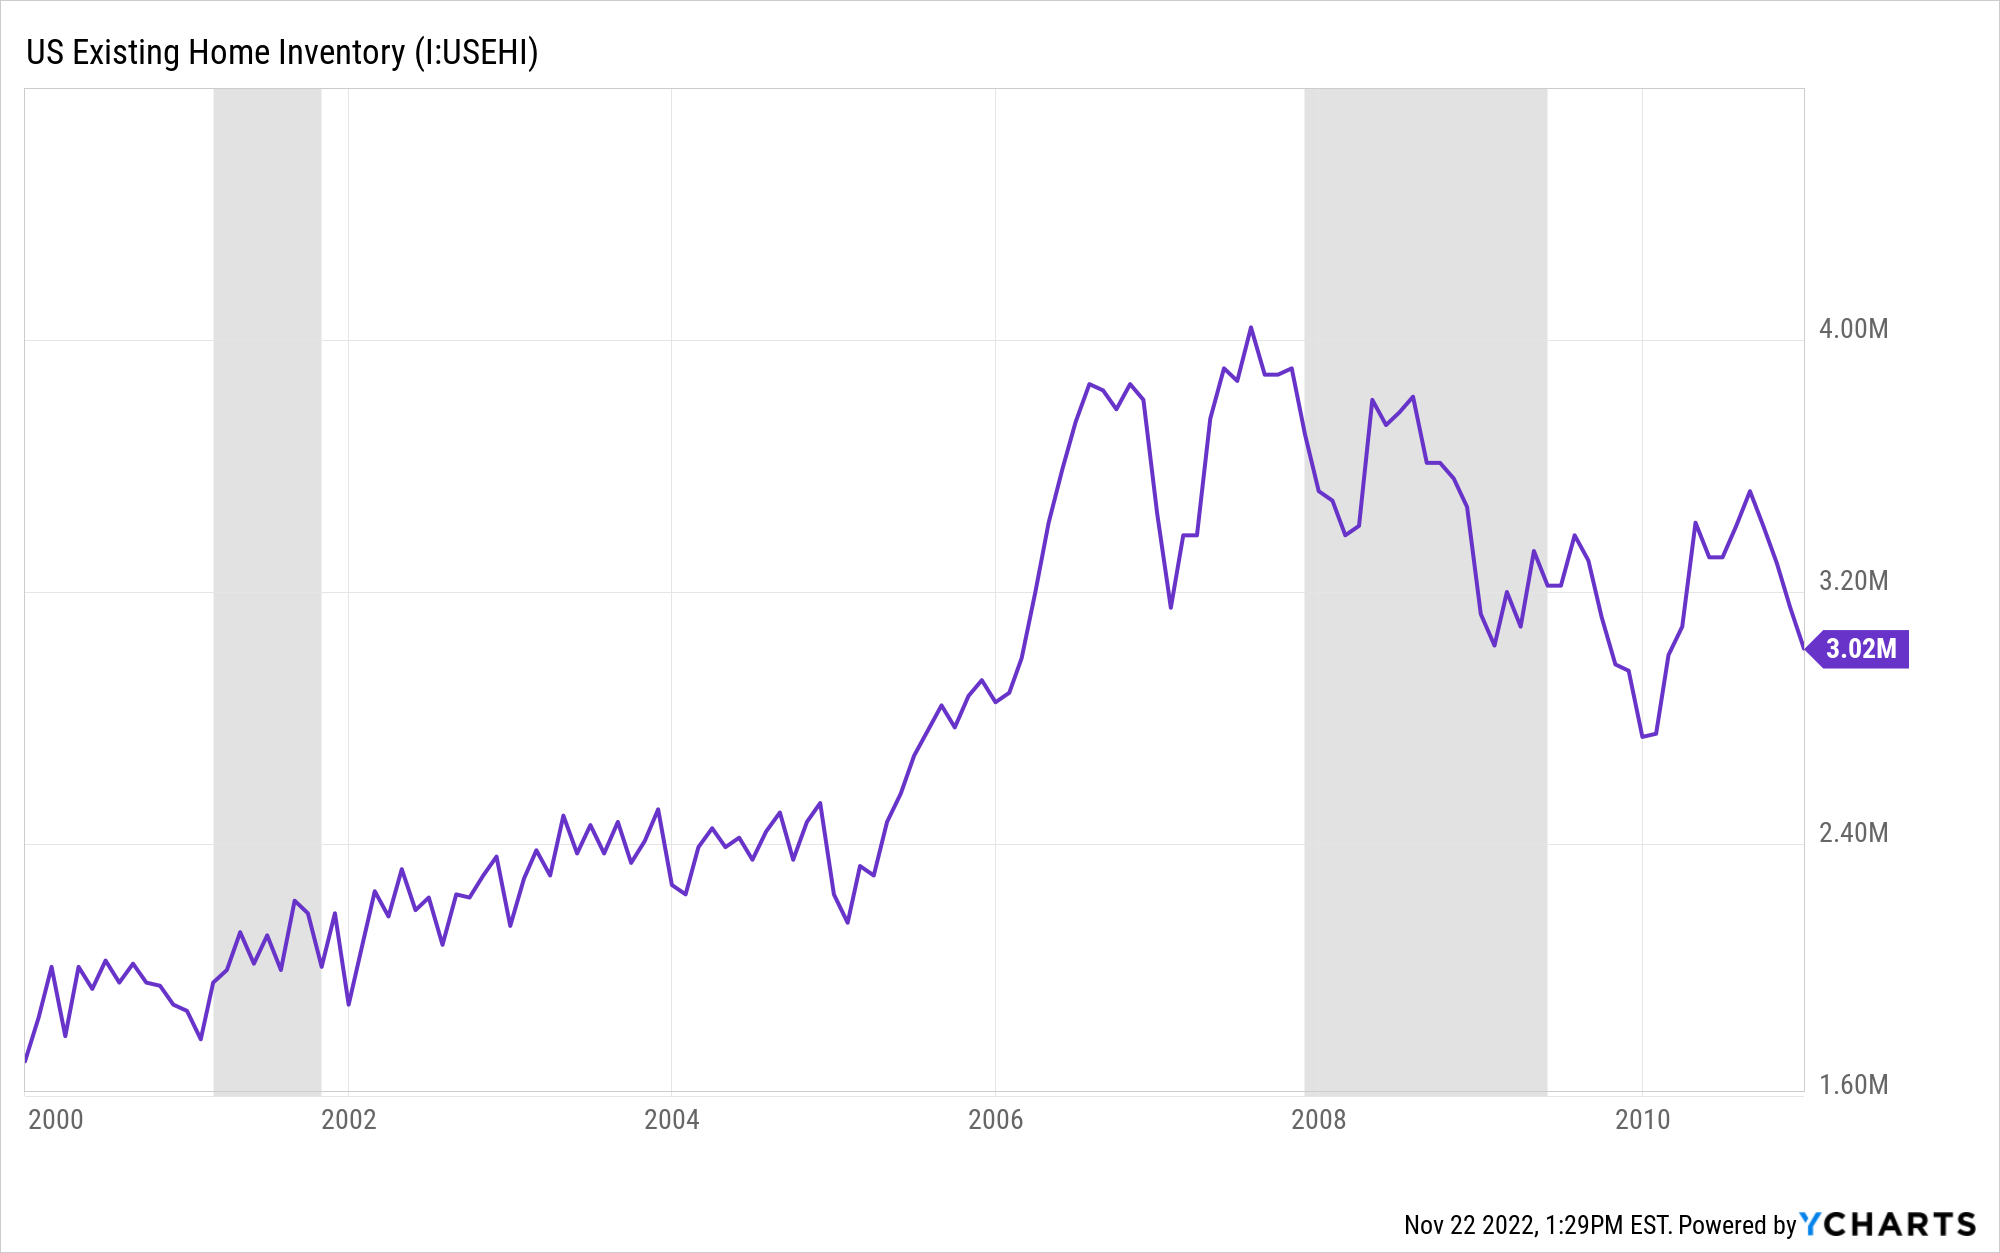 US Existing Home Inventory 2010